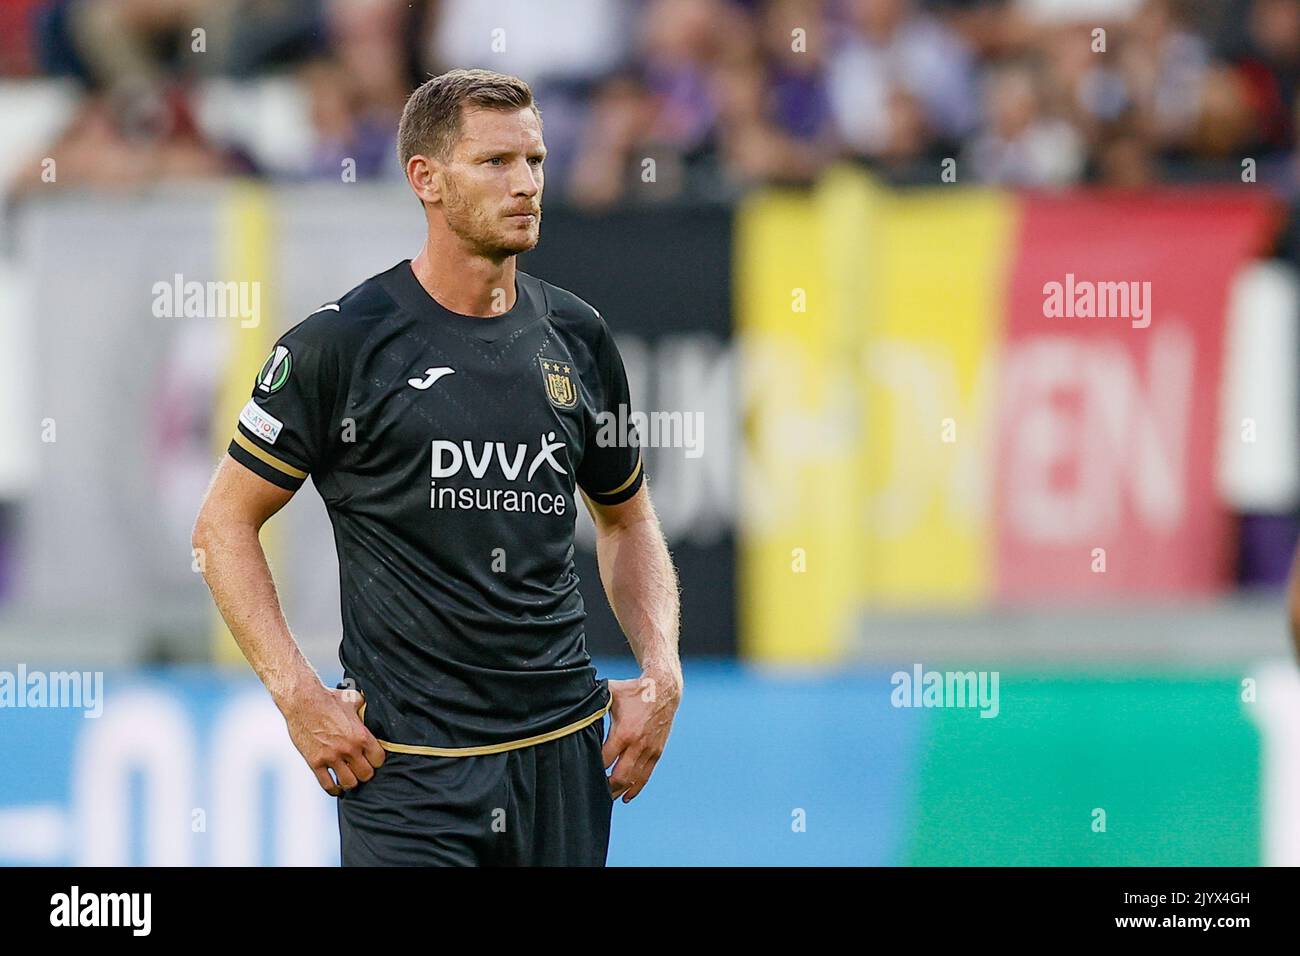 Anderlecht's Jan Vertonghen pictured during a soccer game between Belgian RSC Anderlecht and Danish Silkeborg IF, Thursday 08 September 2022, in Anderlecht, on the opening day of the group stage of the UEFA Conference League competition. BELGA PHOTO BRUNO FAHY Stock Photo